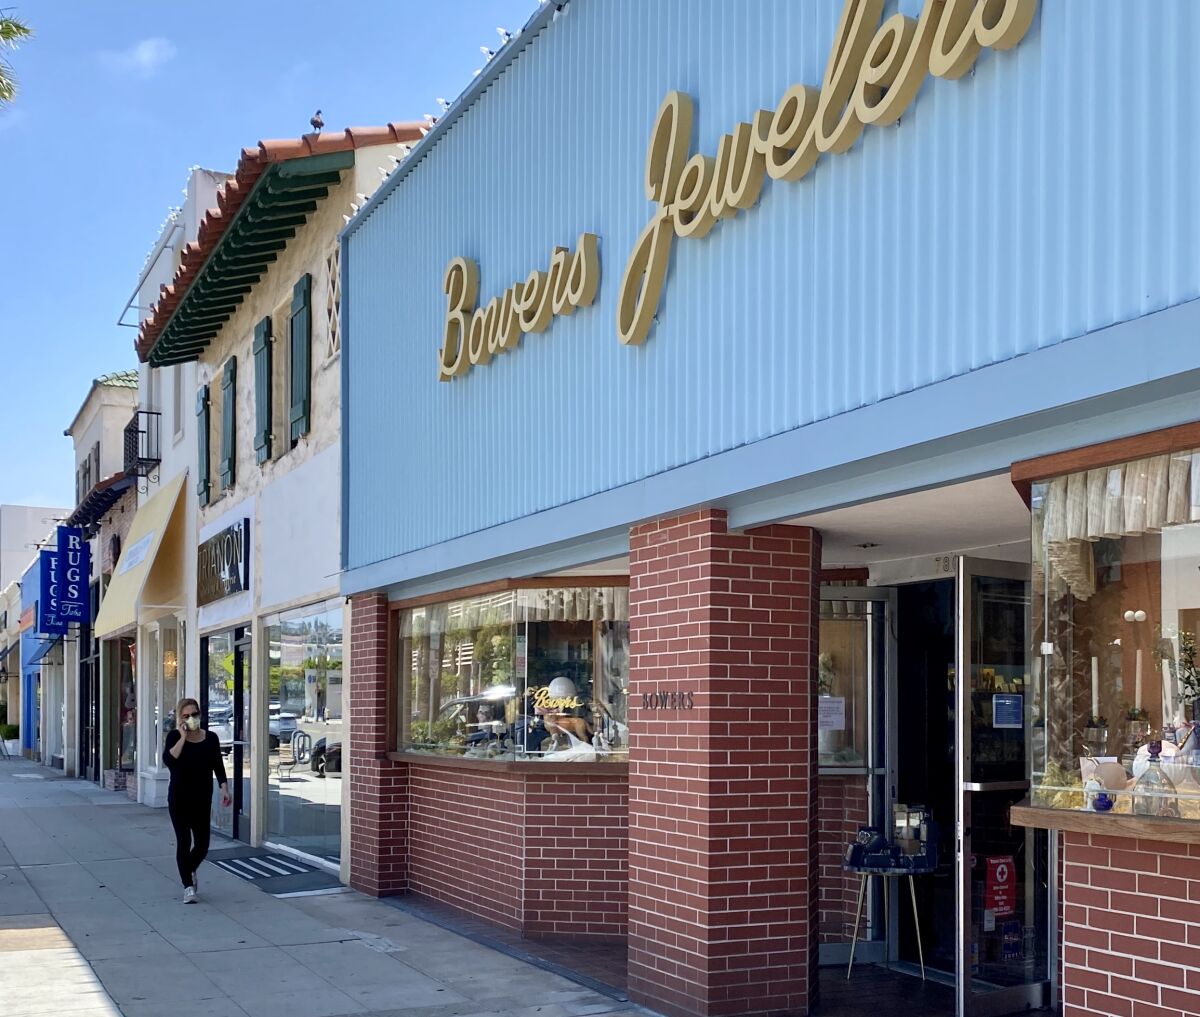 Several shops in La Jolla, including Bowers Jewelers on Girard Avenue, are open for curbside shopping, with a Safe Reopening Plan posted.